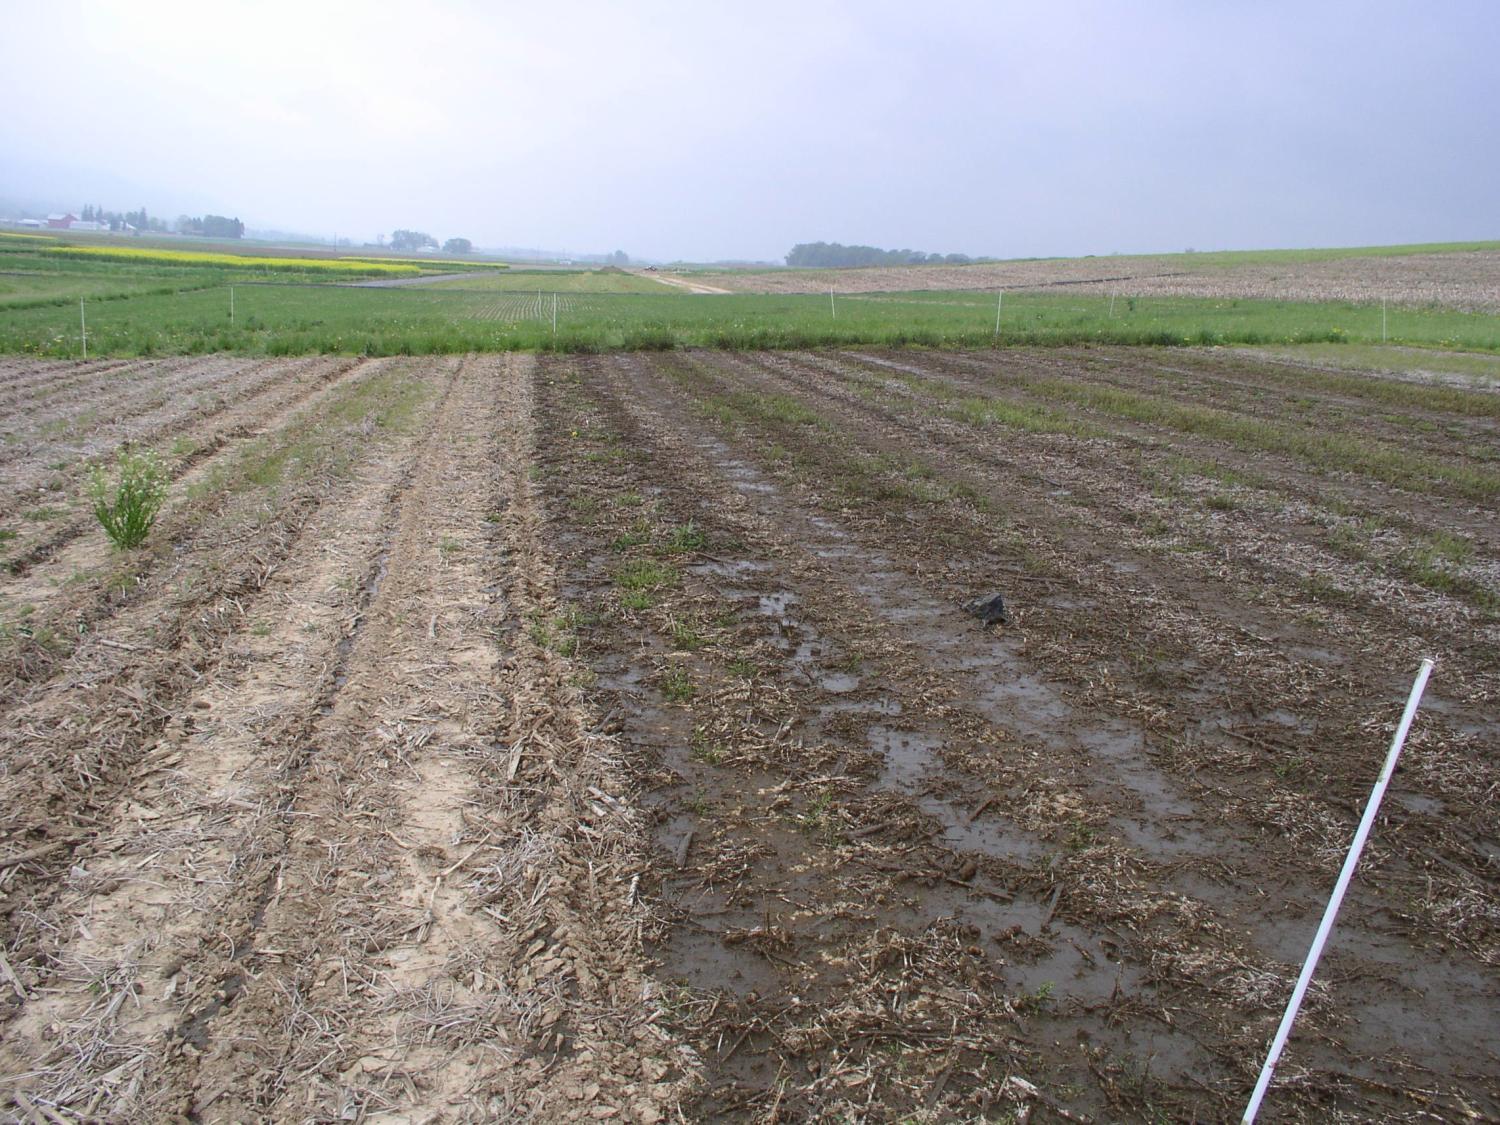 The difference between a field treated with injected liquid manure (left) and broadcasted manure is obvious in this comparison photo. Injecting manure reduces ammonia volatilization and soluble phosphorus runoff from crop fields. Credit: Robert Meinen. All Rights Reserved.